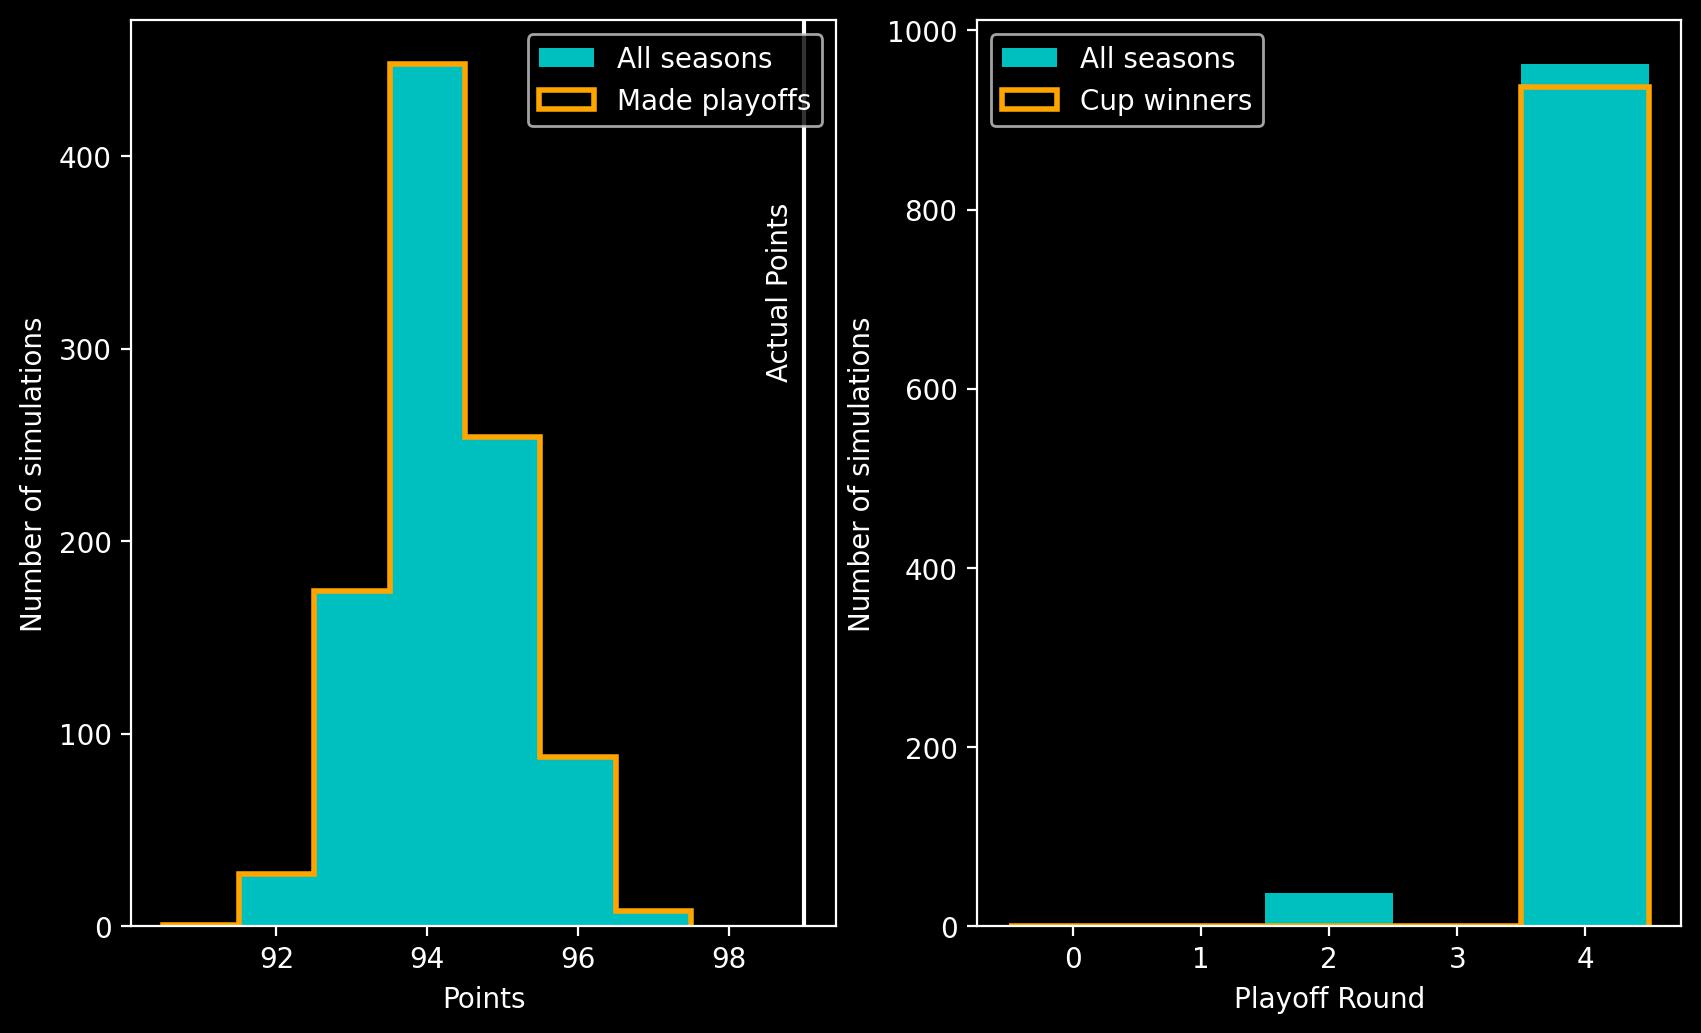 Two panel plot showing histograms. Left panel shows a histogram of points on the x-axis against number of simulations on the y-axis, the peak is at 94 points. Right panel shows playoff round on the x-axis against number of simulations on the y-axis. The largest bar is at playoff round 4.